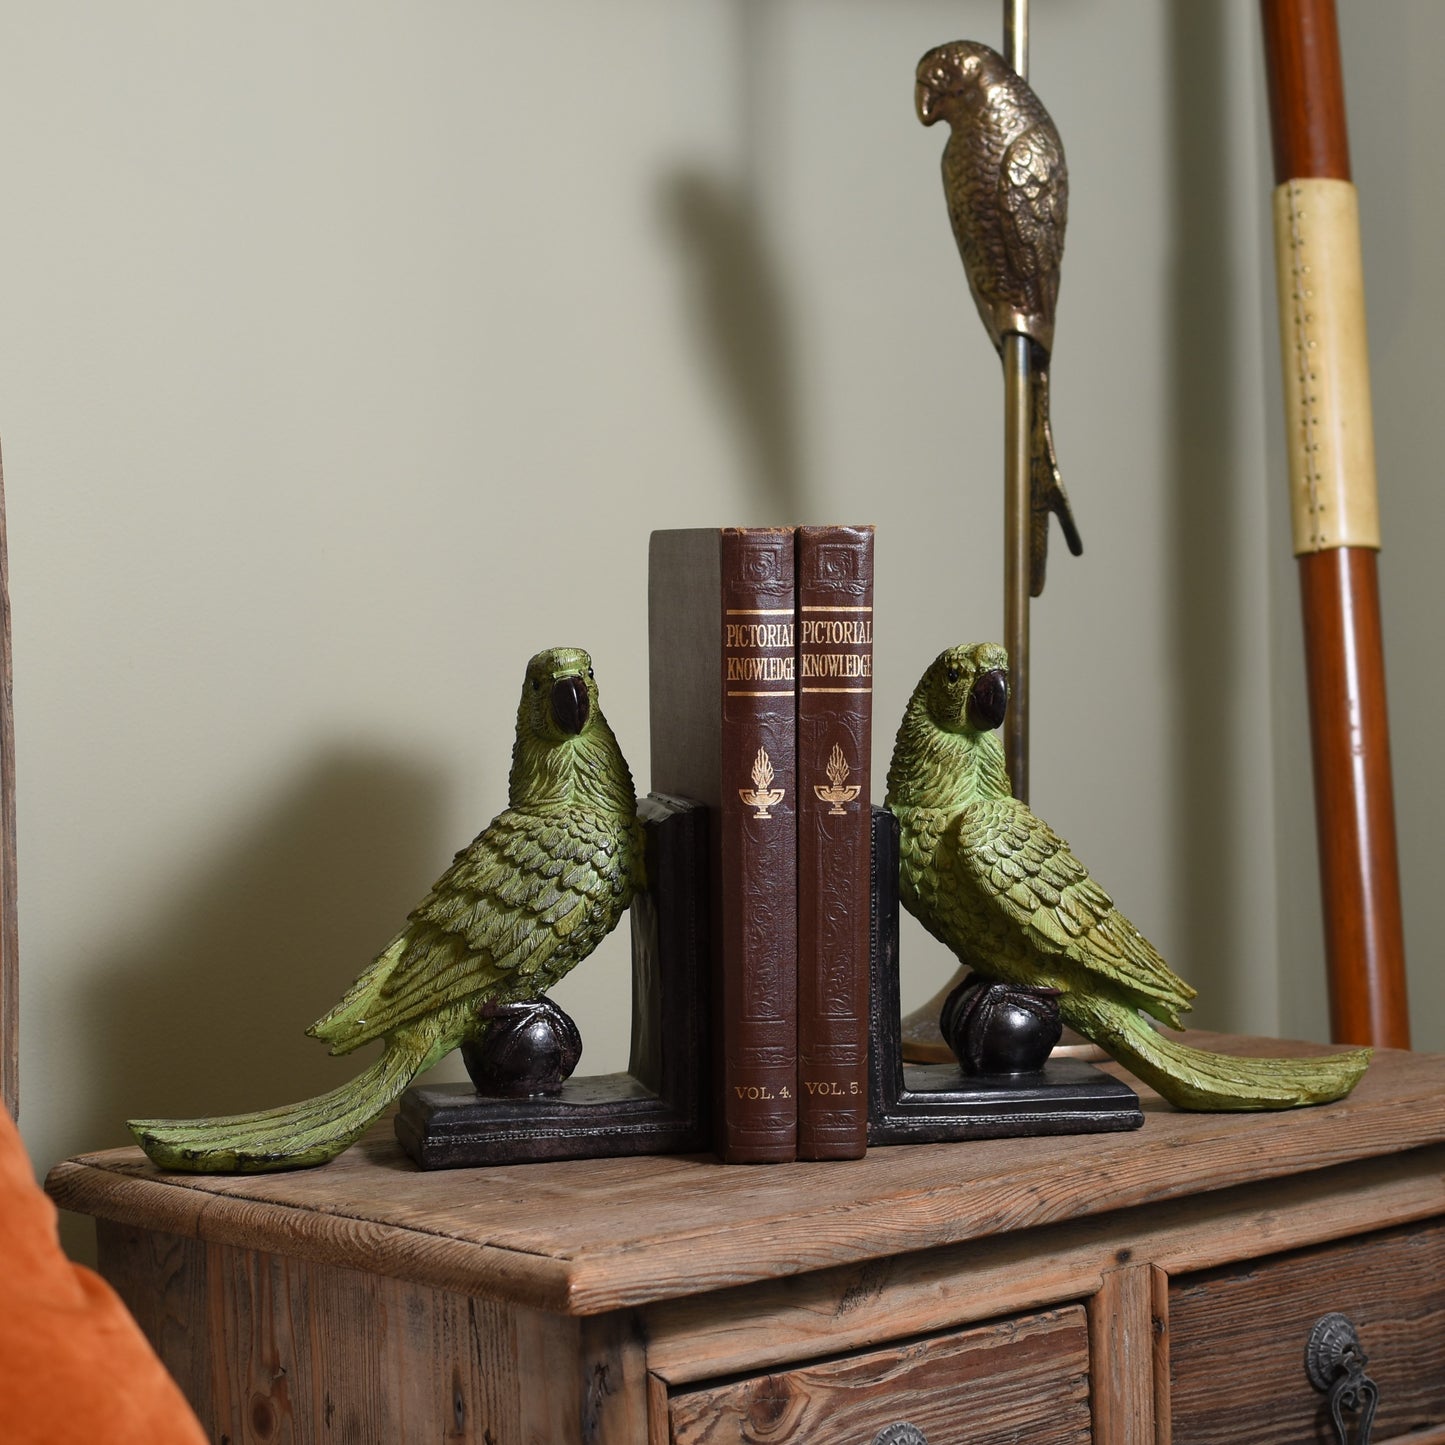 Pair of Green Parrot Bookends